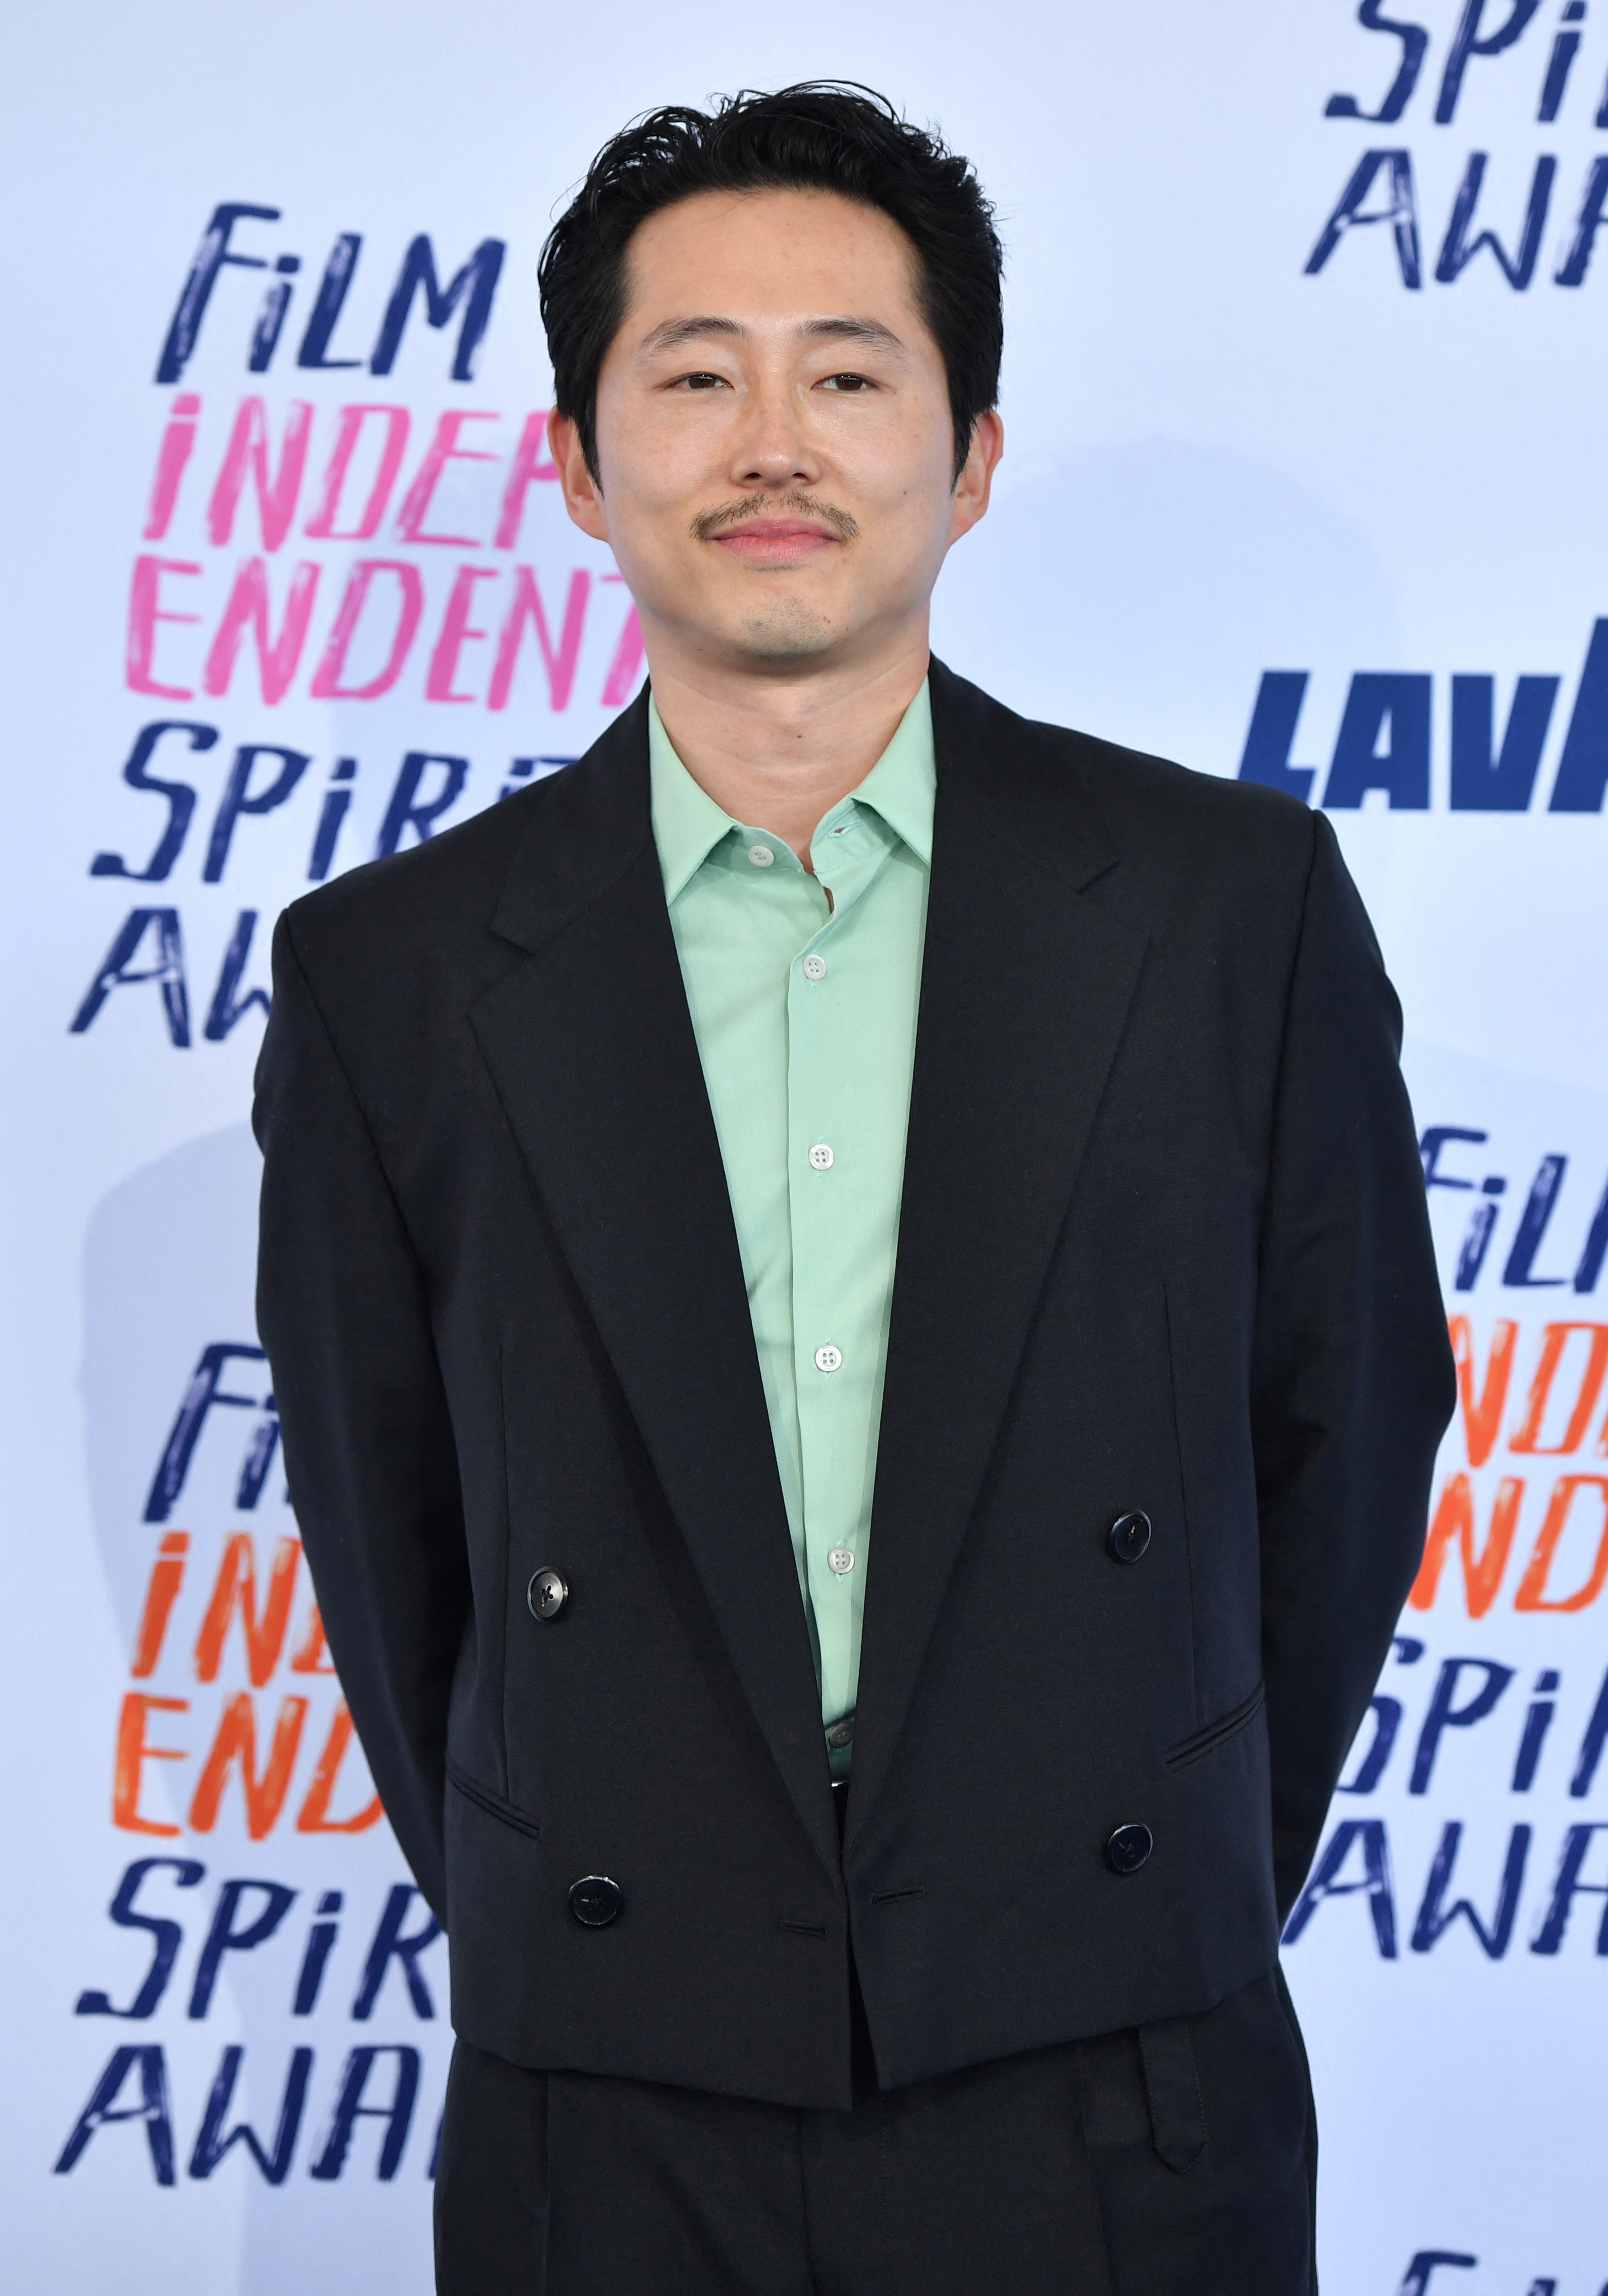 Steven Yeun in a suit and mint shirt at the Spirit Awards